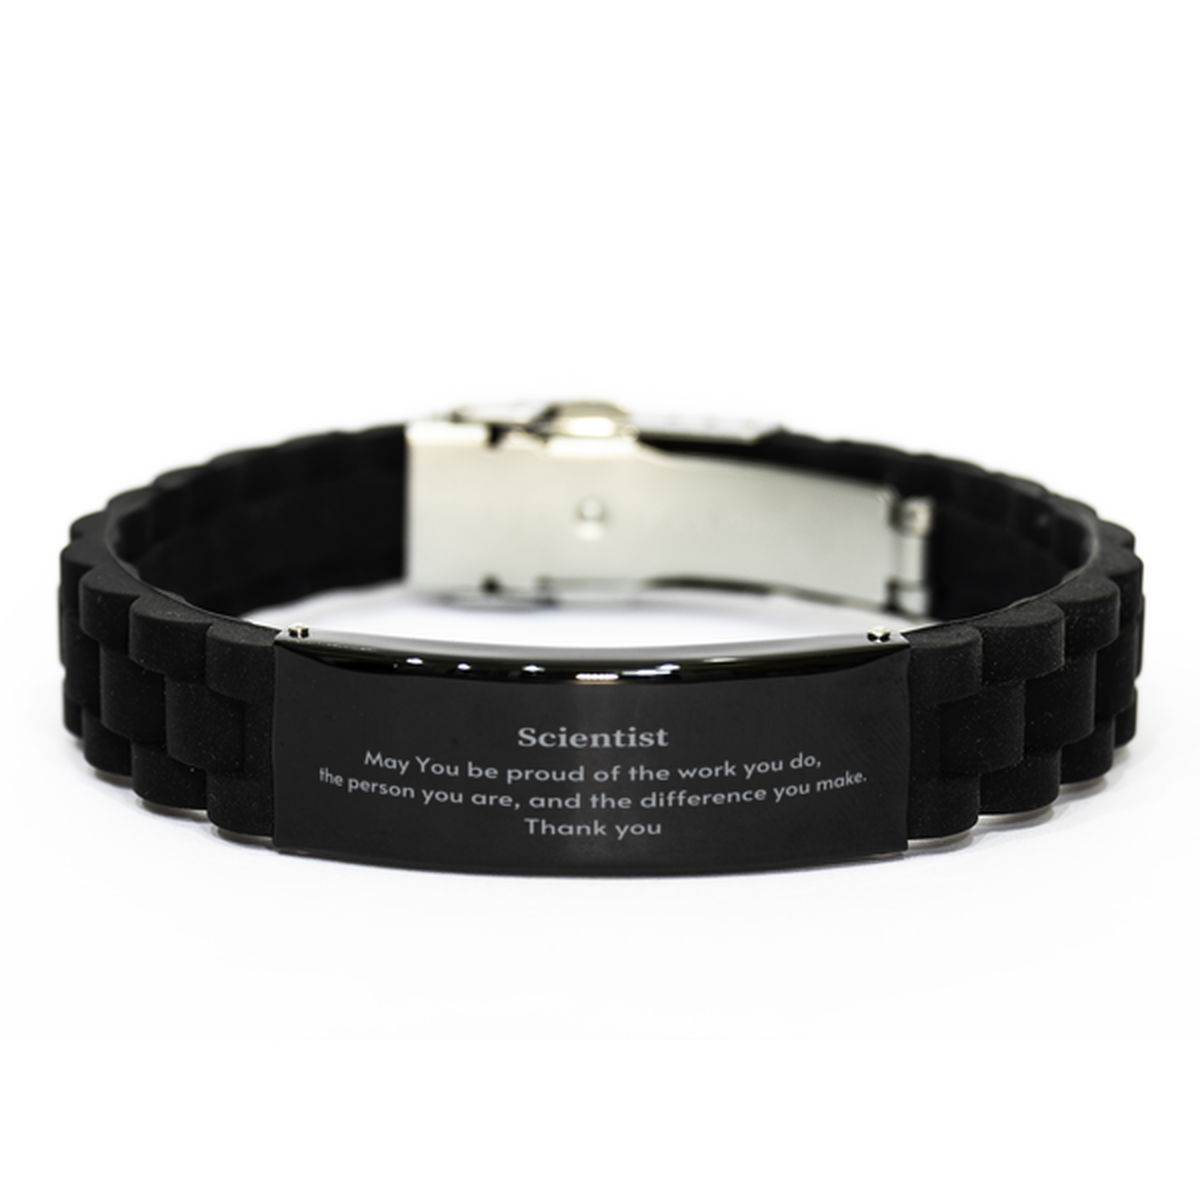 Heartwarming Black Glidelock Clasp Bracelet Retirement Coworkers Gifts for Scientist, Scientist May You be proud of the work you do, the person you are Gifts for Boss Men Women Friends